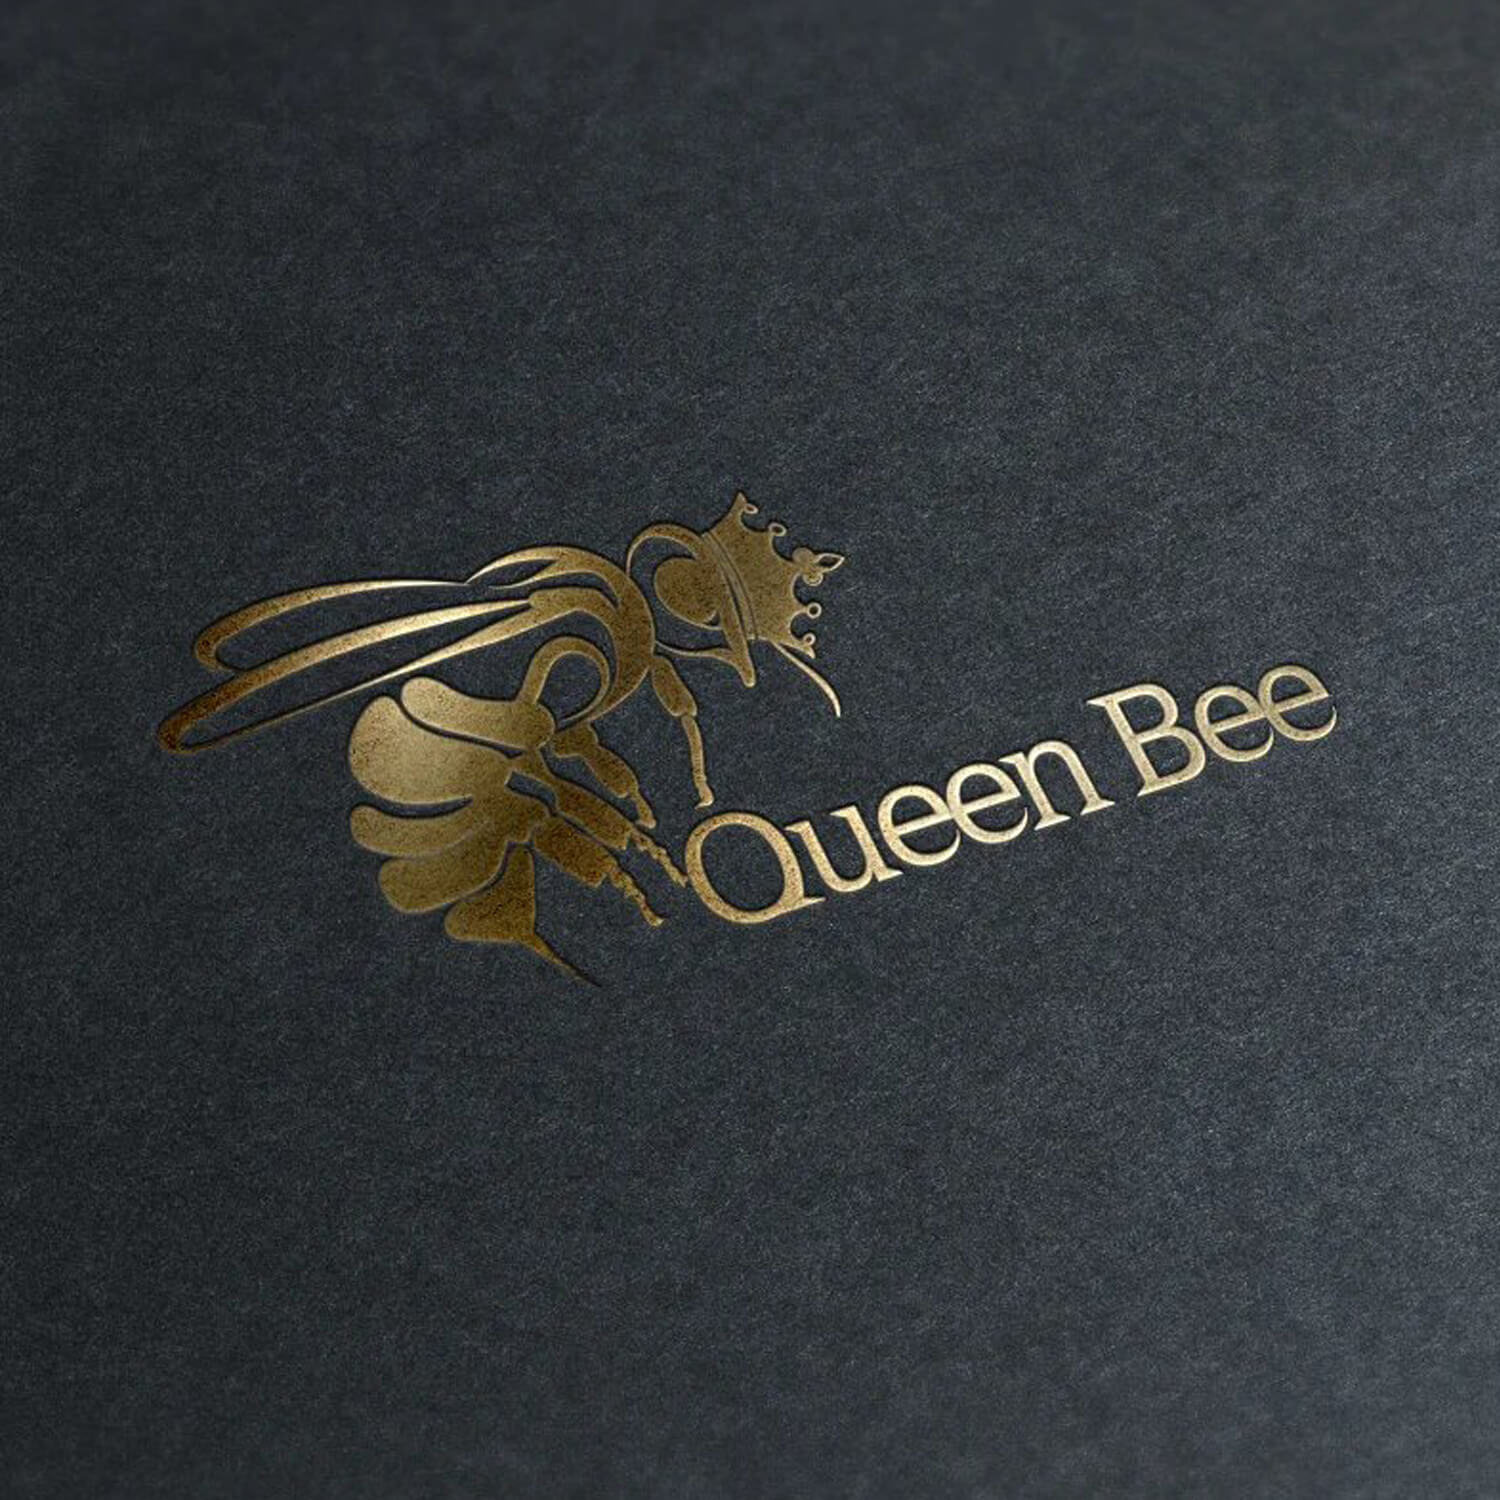 Golden bee and the inscription in gold color "queen bee" on a gray velvet background.